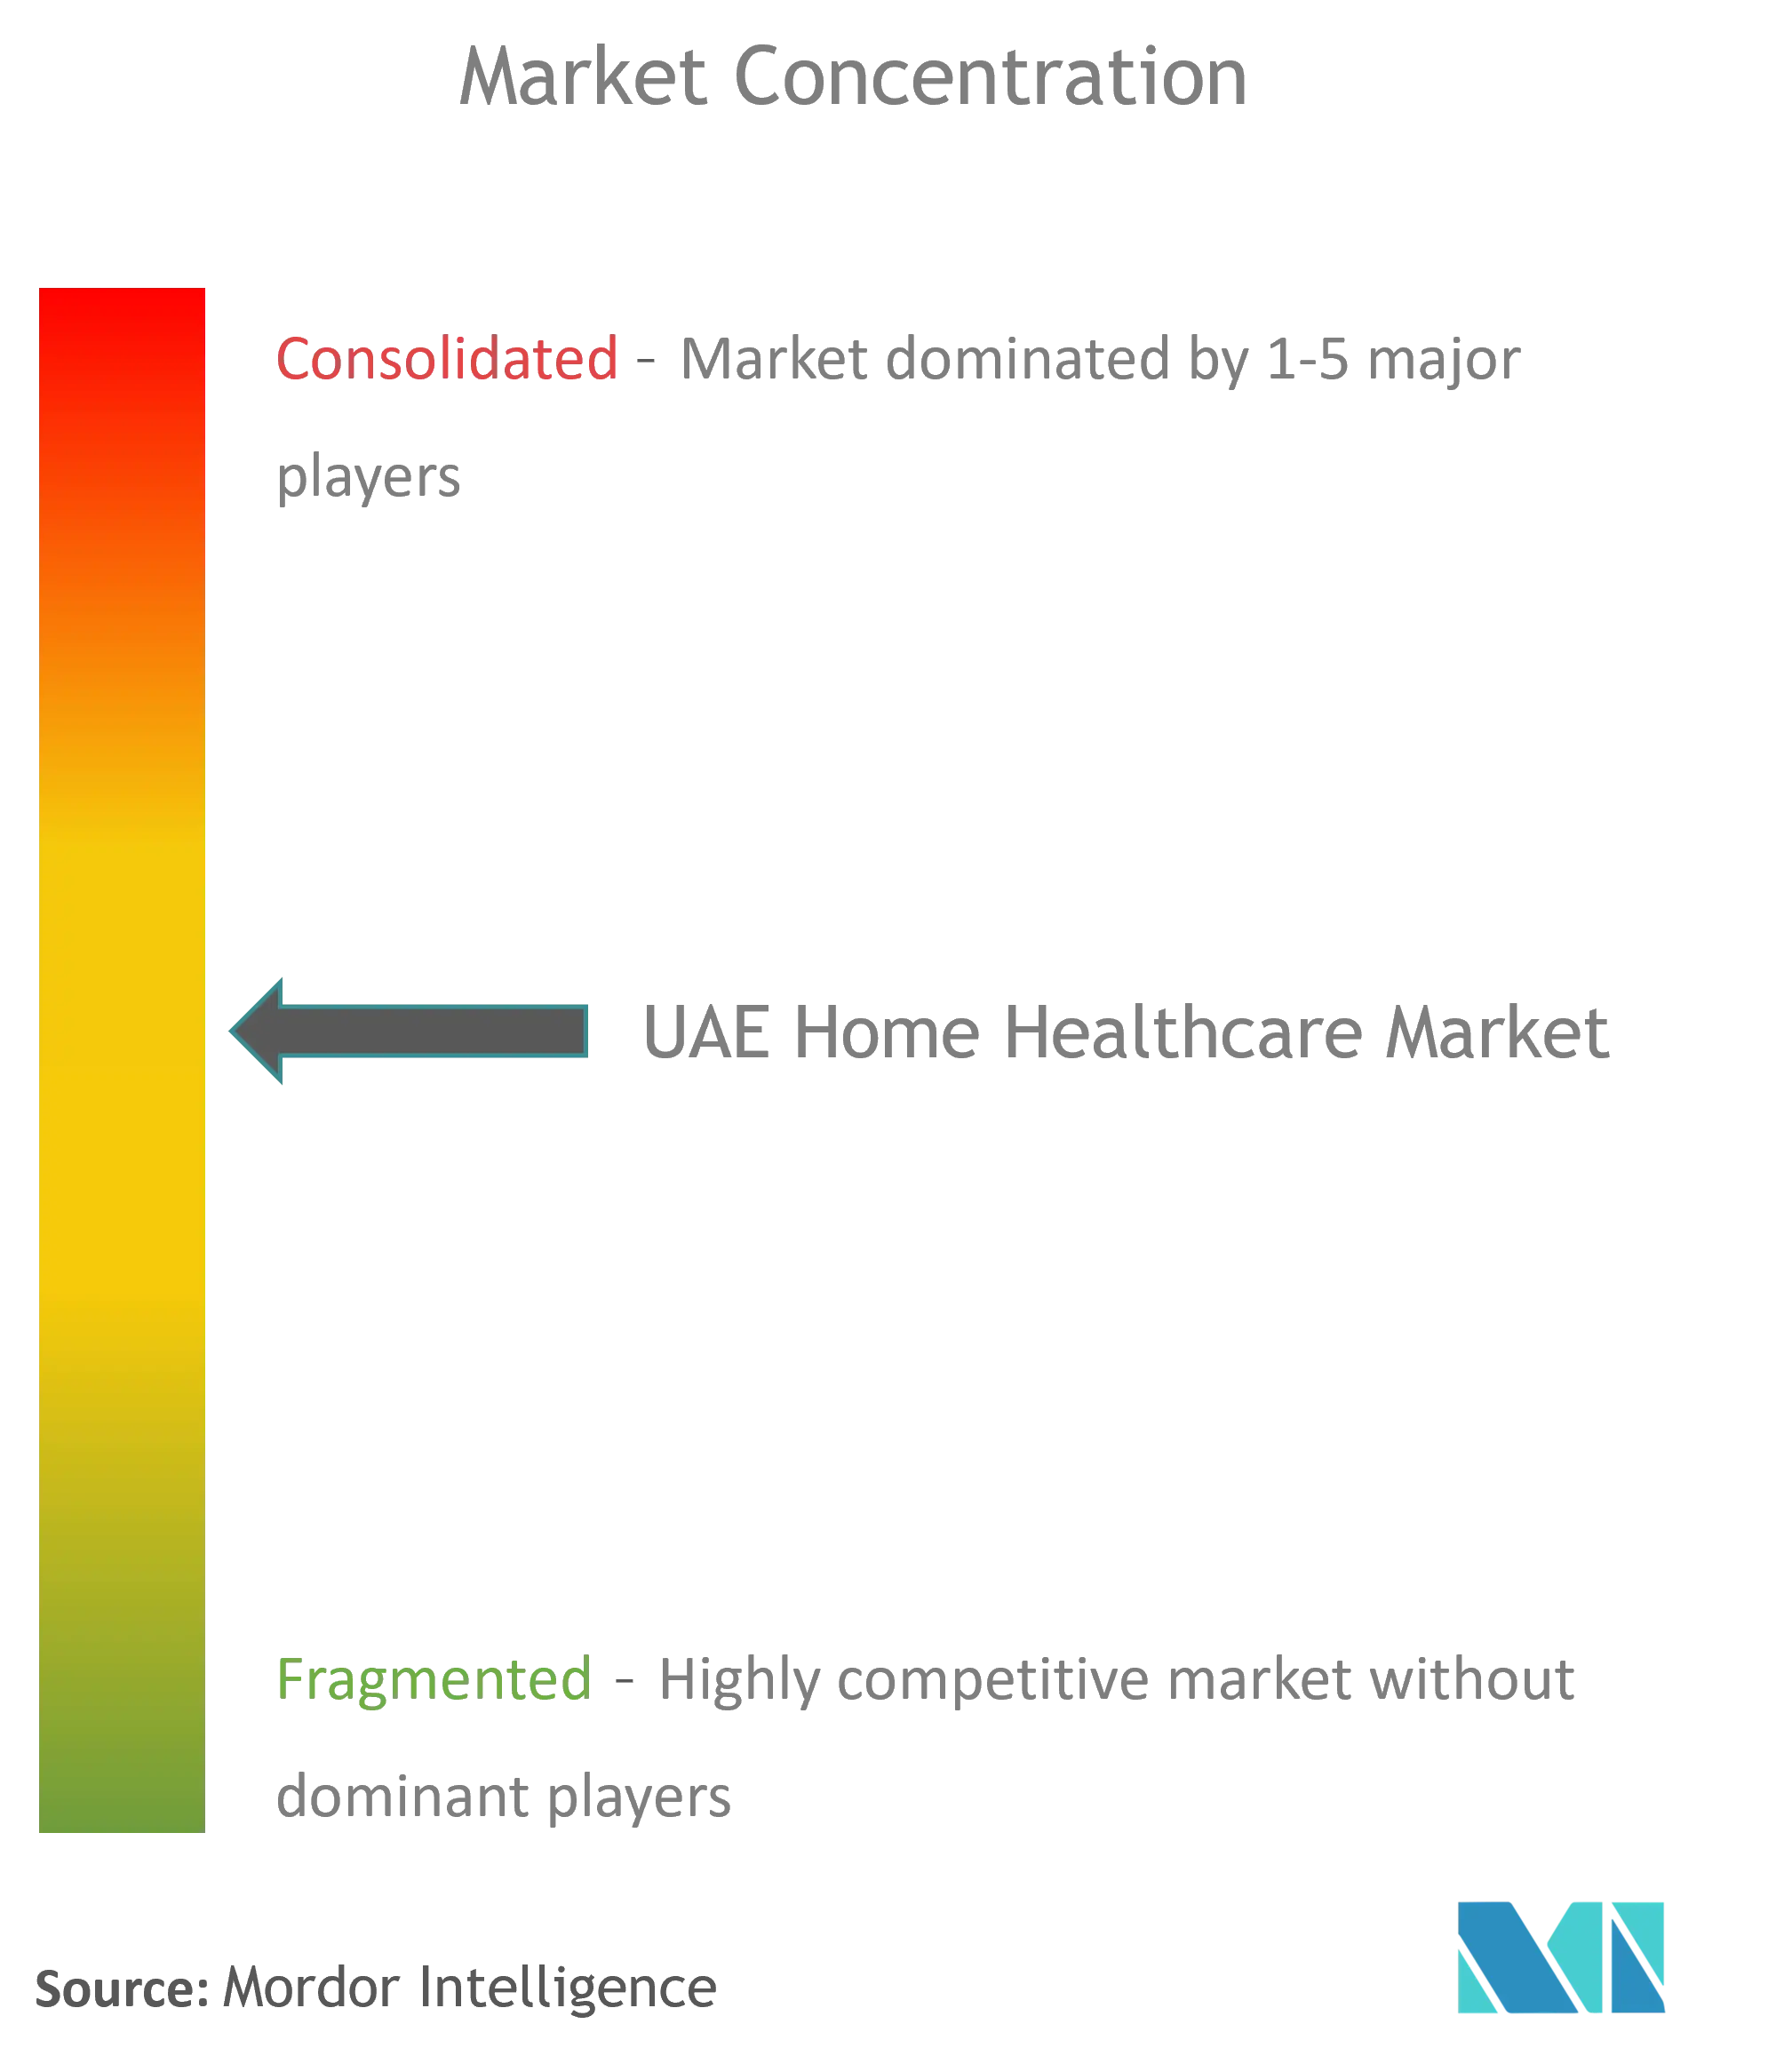 Home Healthcare Industry in UAE Market Concentration